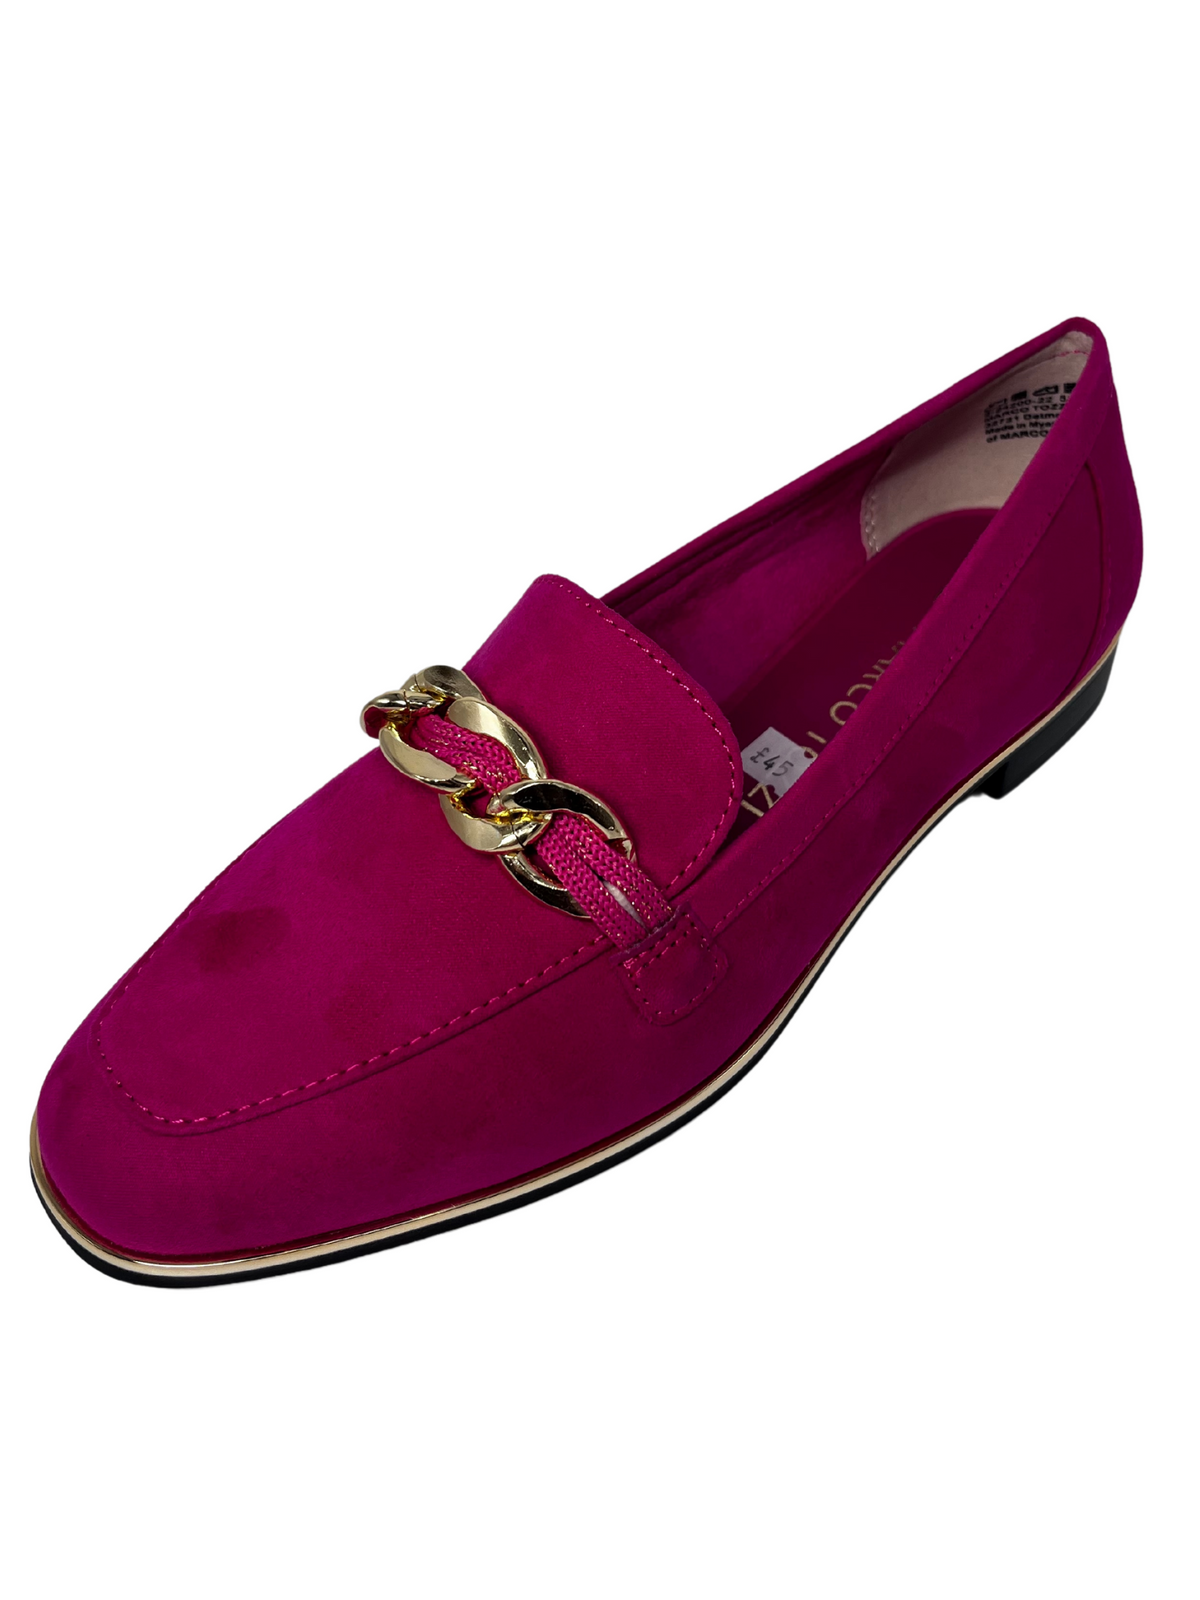 Marco Tozzi Pink Loafers With Chain Detail